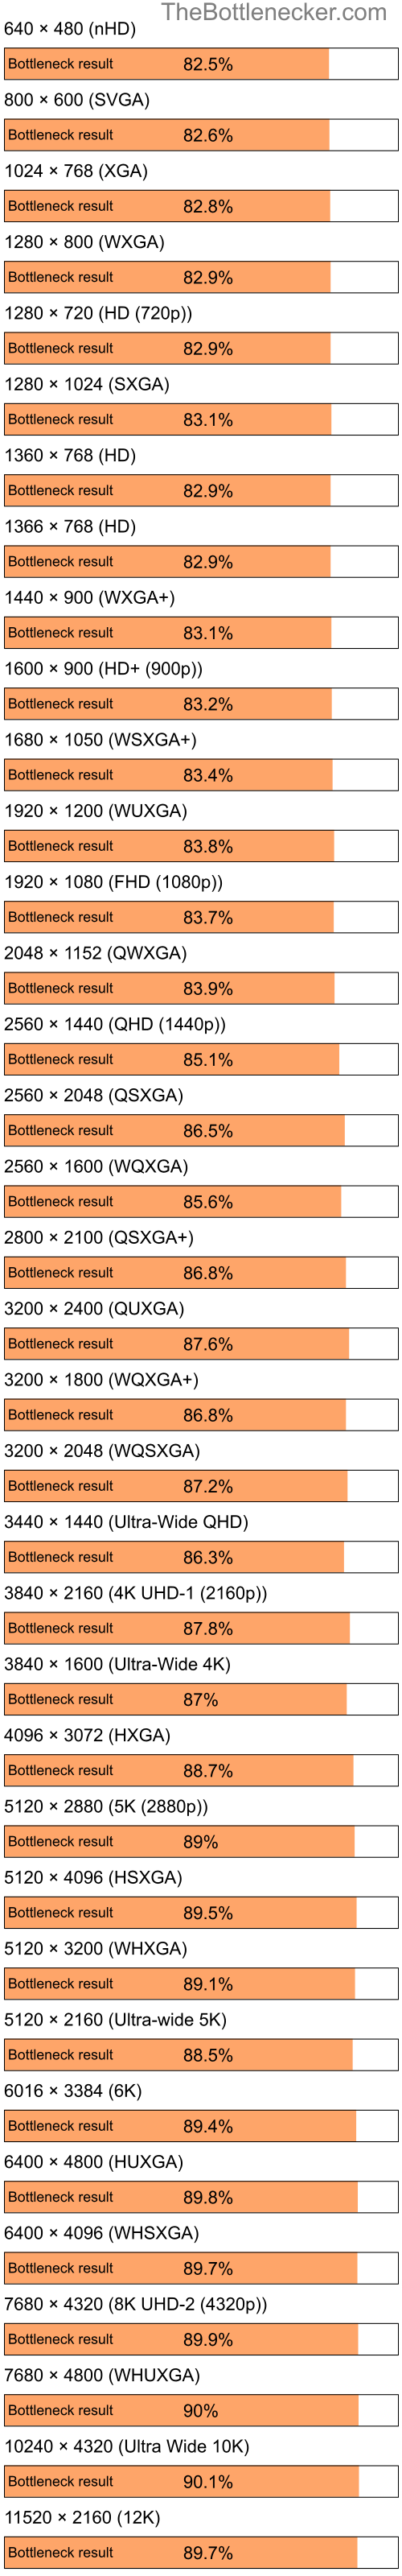 Bottleneck results by resolution for Intel Celeron M 410 and NVIDIA GeForce 6200 LE in Graphic Card Intense Tasks